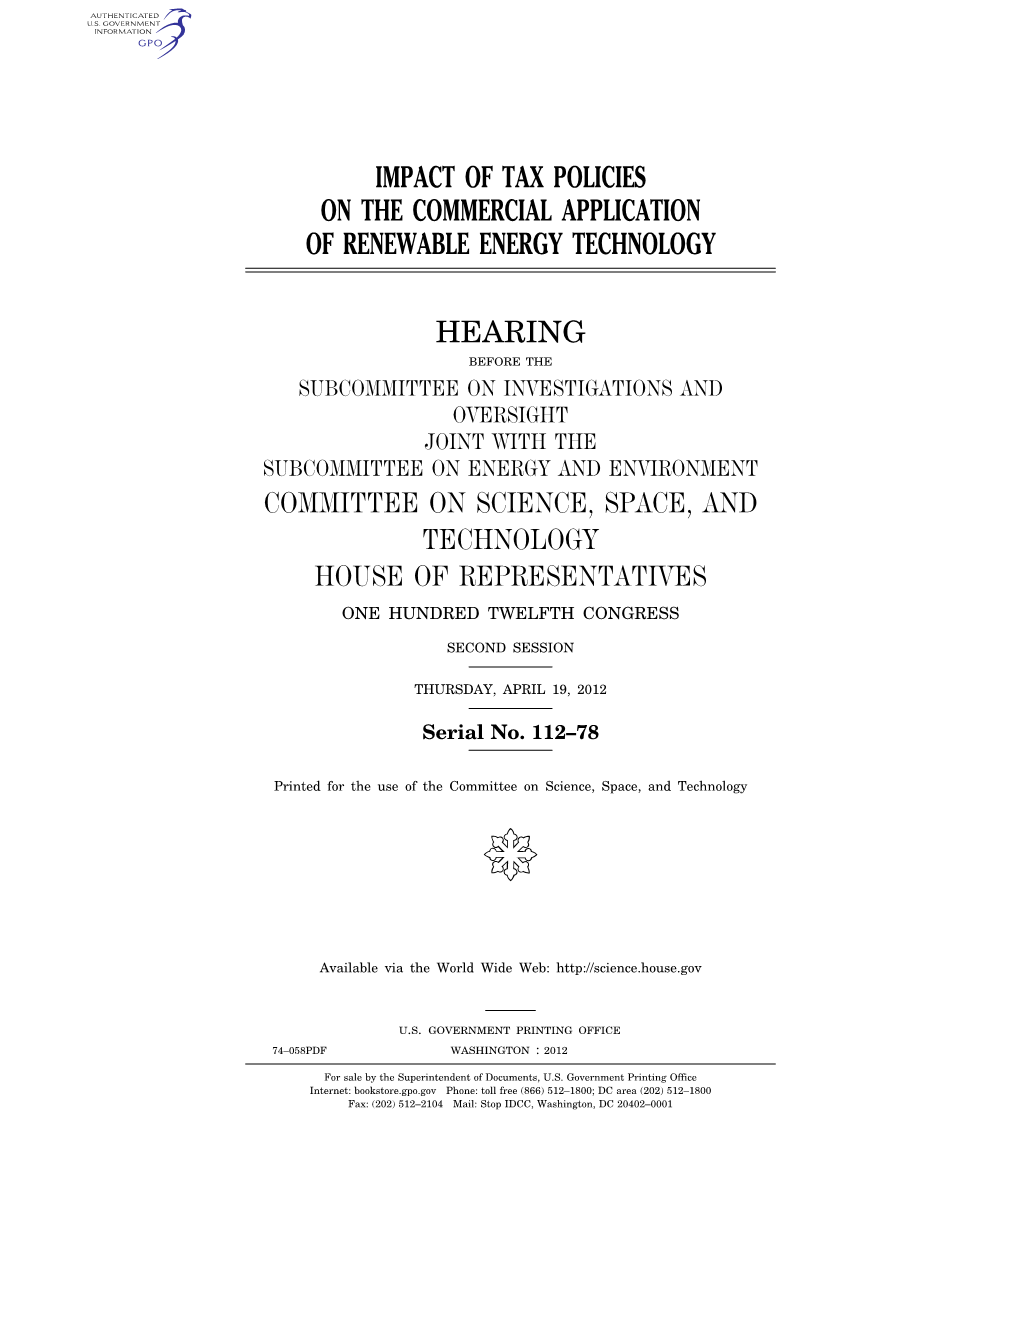 Impact of Tax Policies on the Commercial Application of Renewable Energy Technology Hearing Committee on Science, Space, And